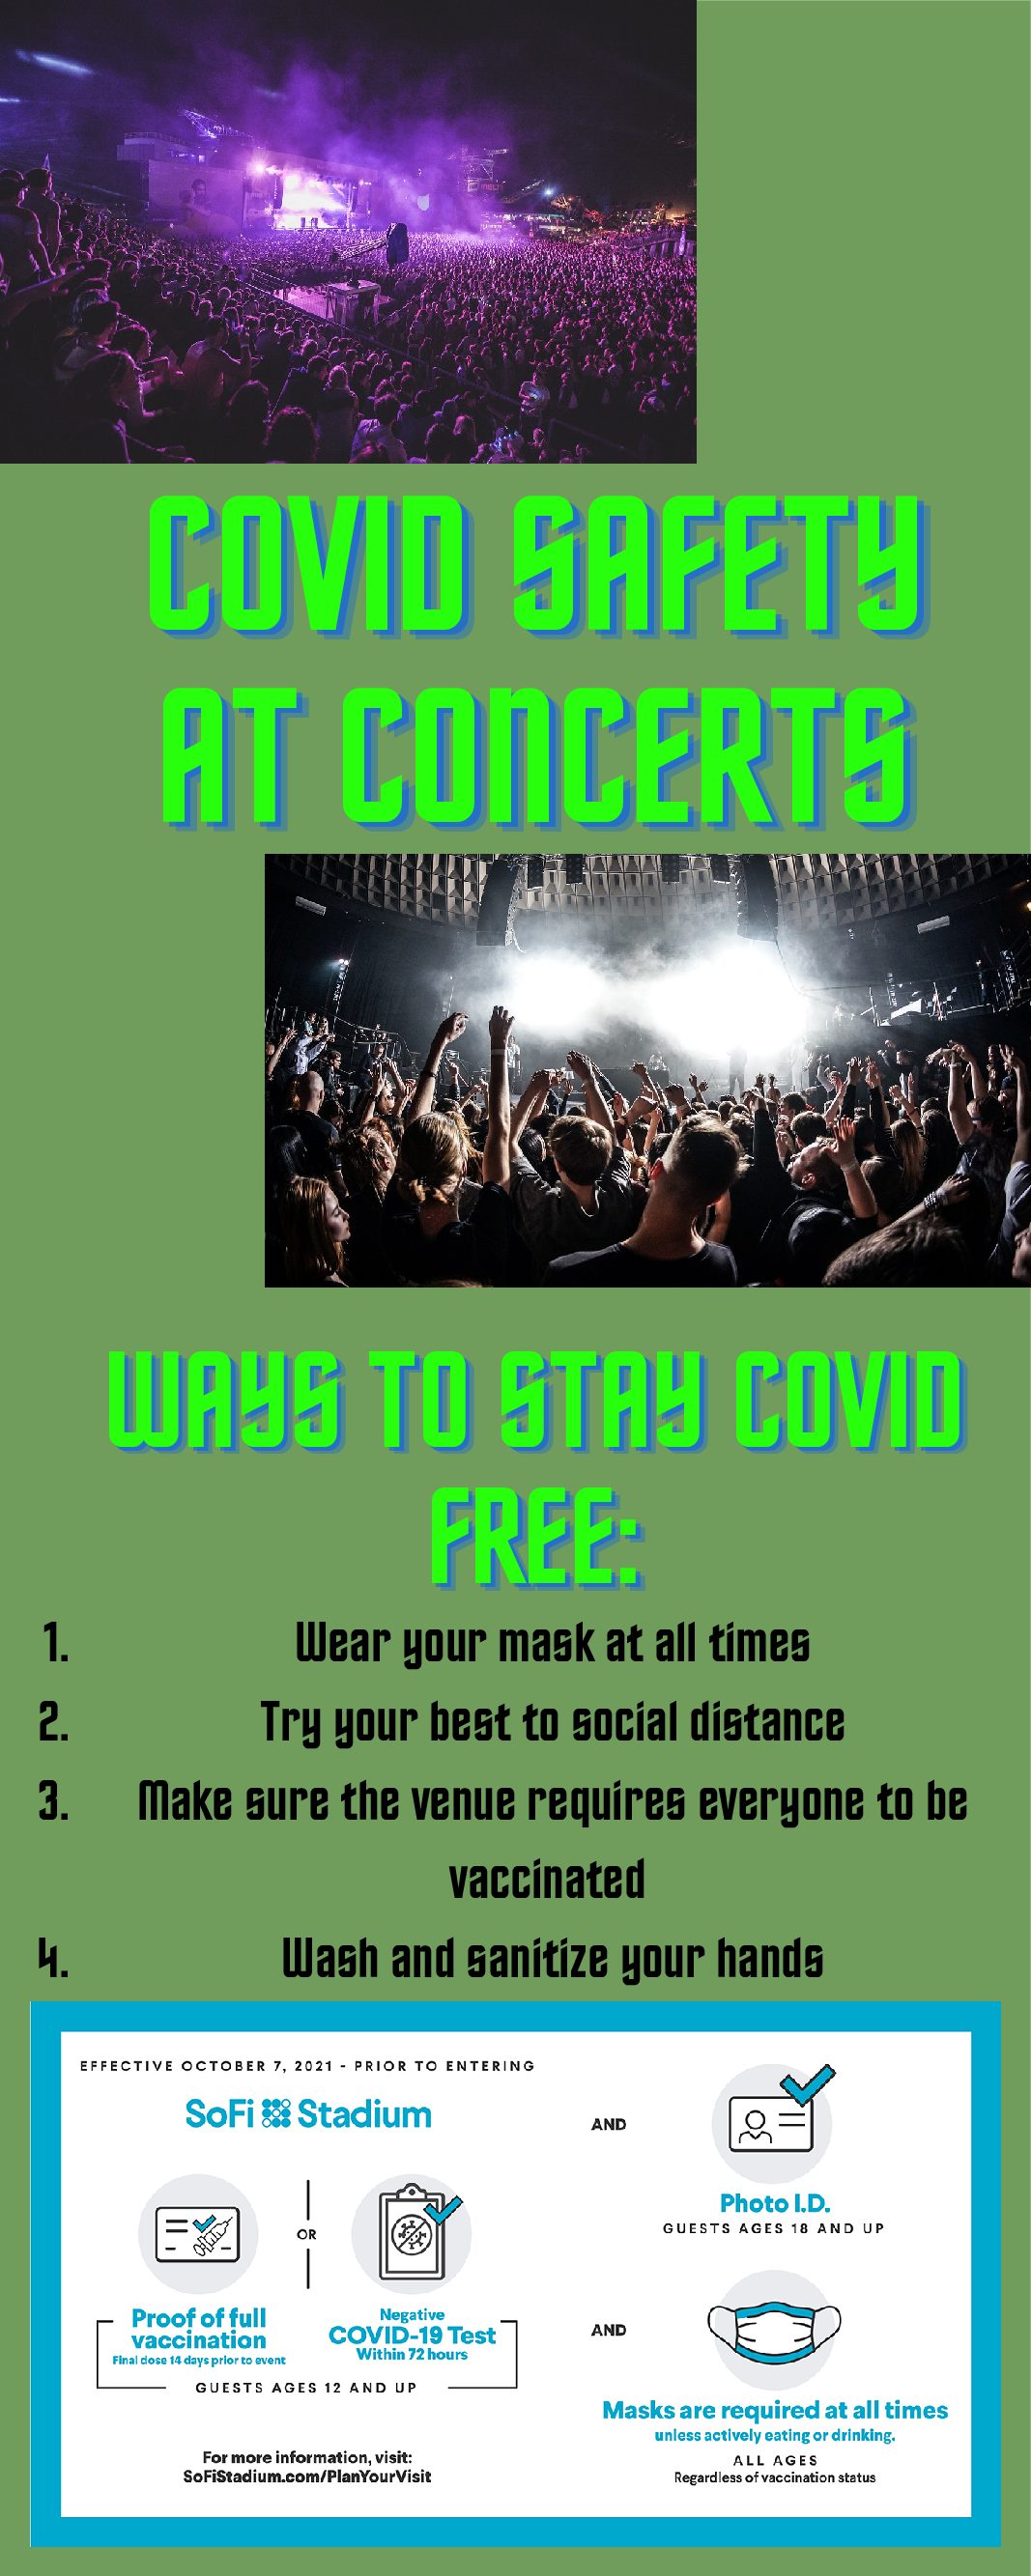 They are many ways to stay safe at concerts amidst COVID, and on the CDC website, one can find any considerations and tips. 